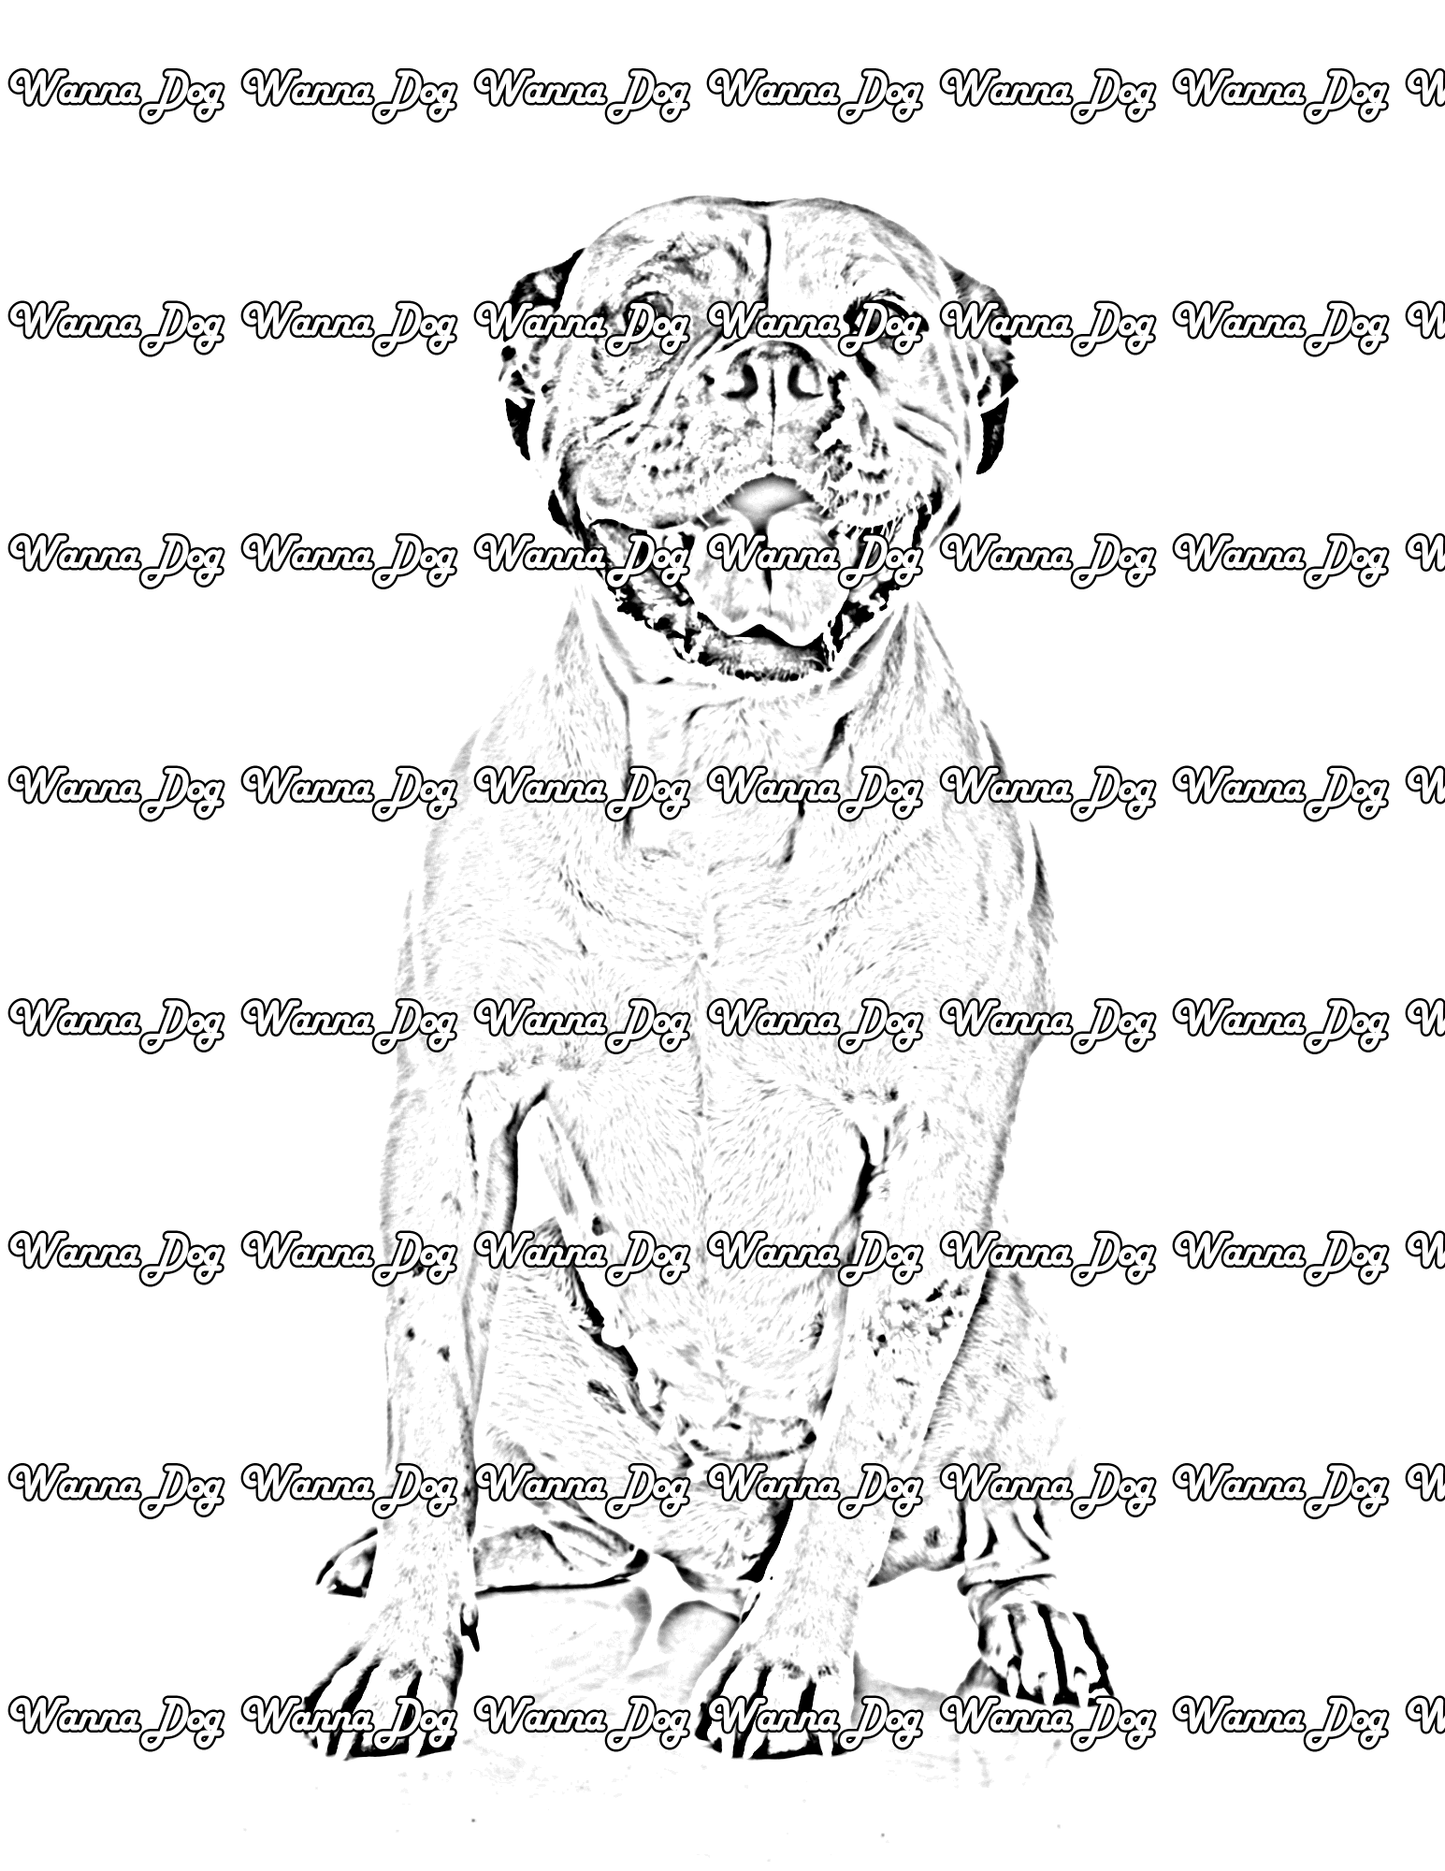 American Bulldog Coloring Page of a American Bulldog sitting with their tongue out